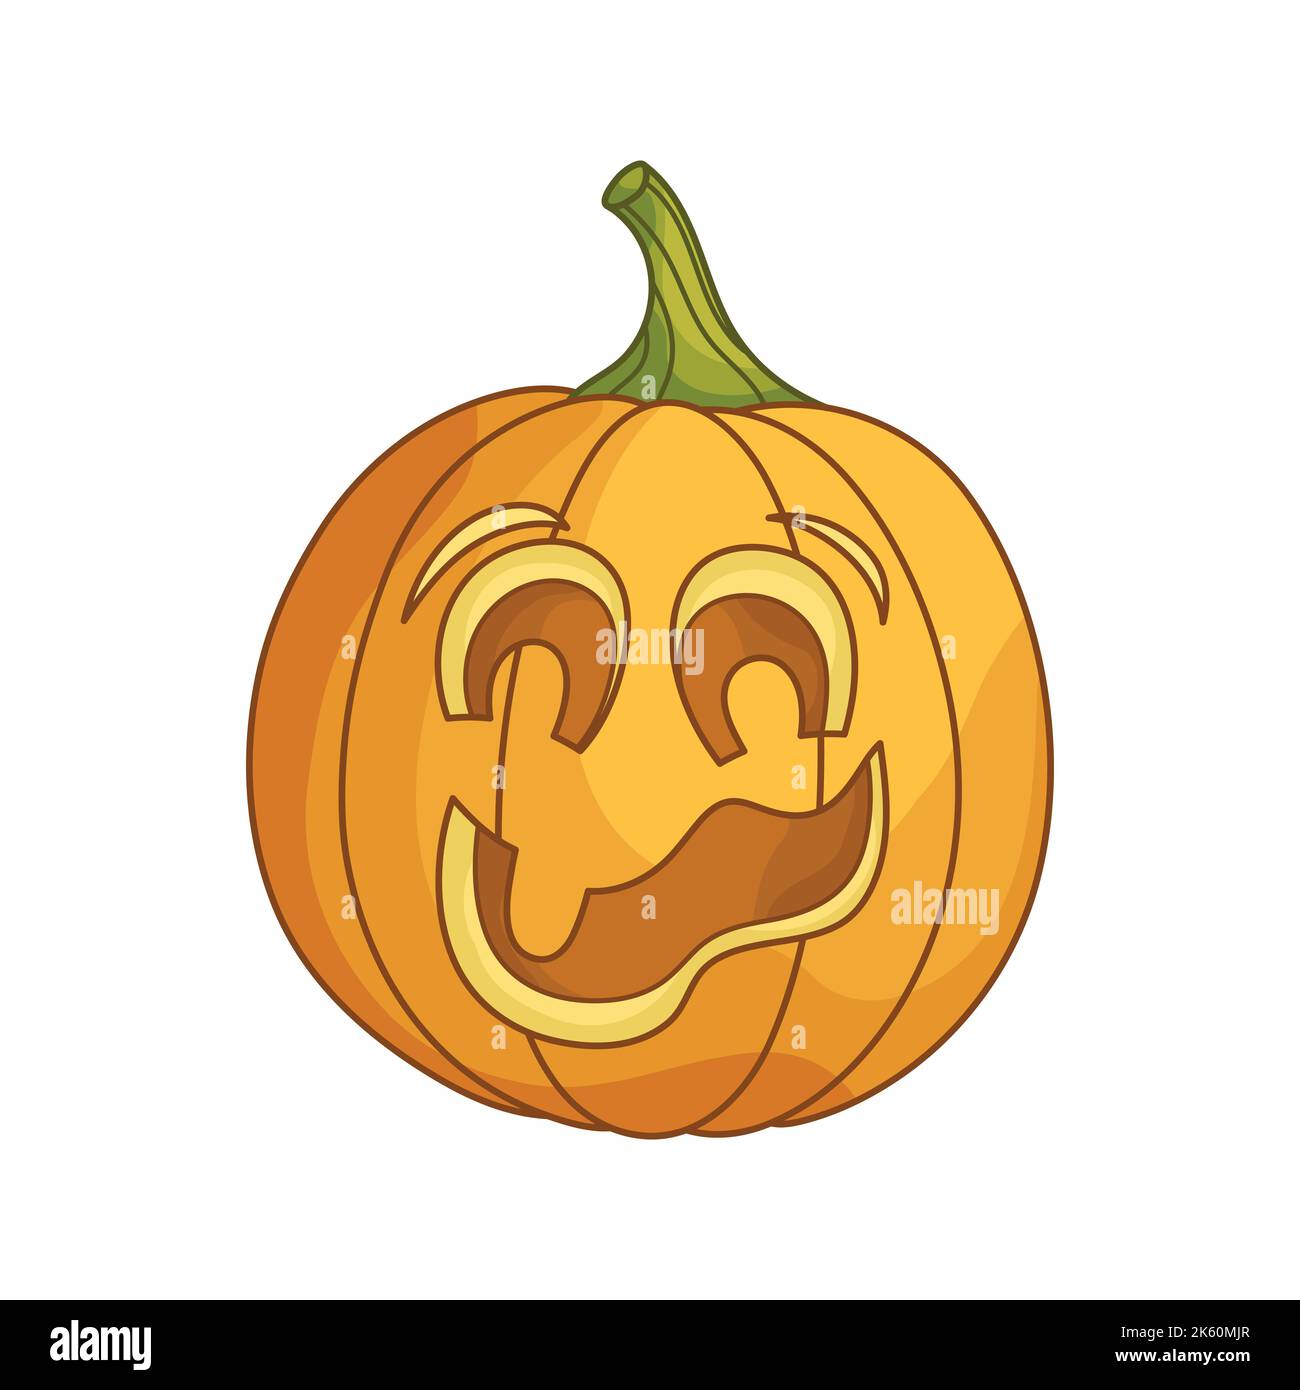 Funny jack-o-lantern pumpkin head. A traditional character for Halloween. Simple design element for greeting cards, posters, stickers, banners and holiday decor. Cute cartoon flat illustration. Stock Vector